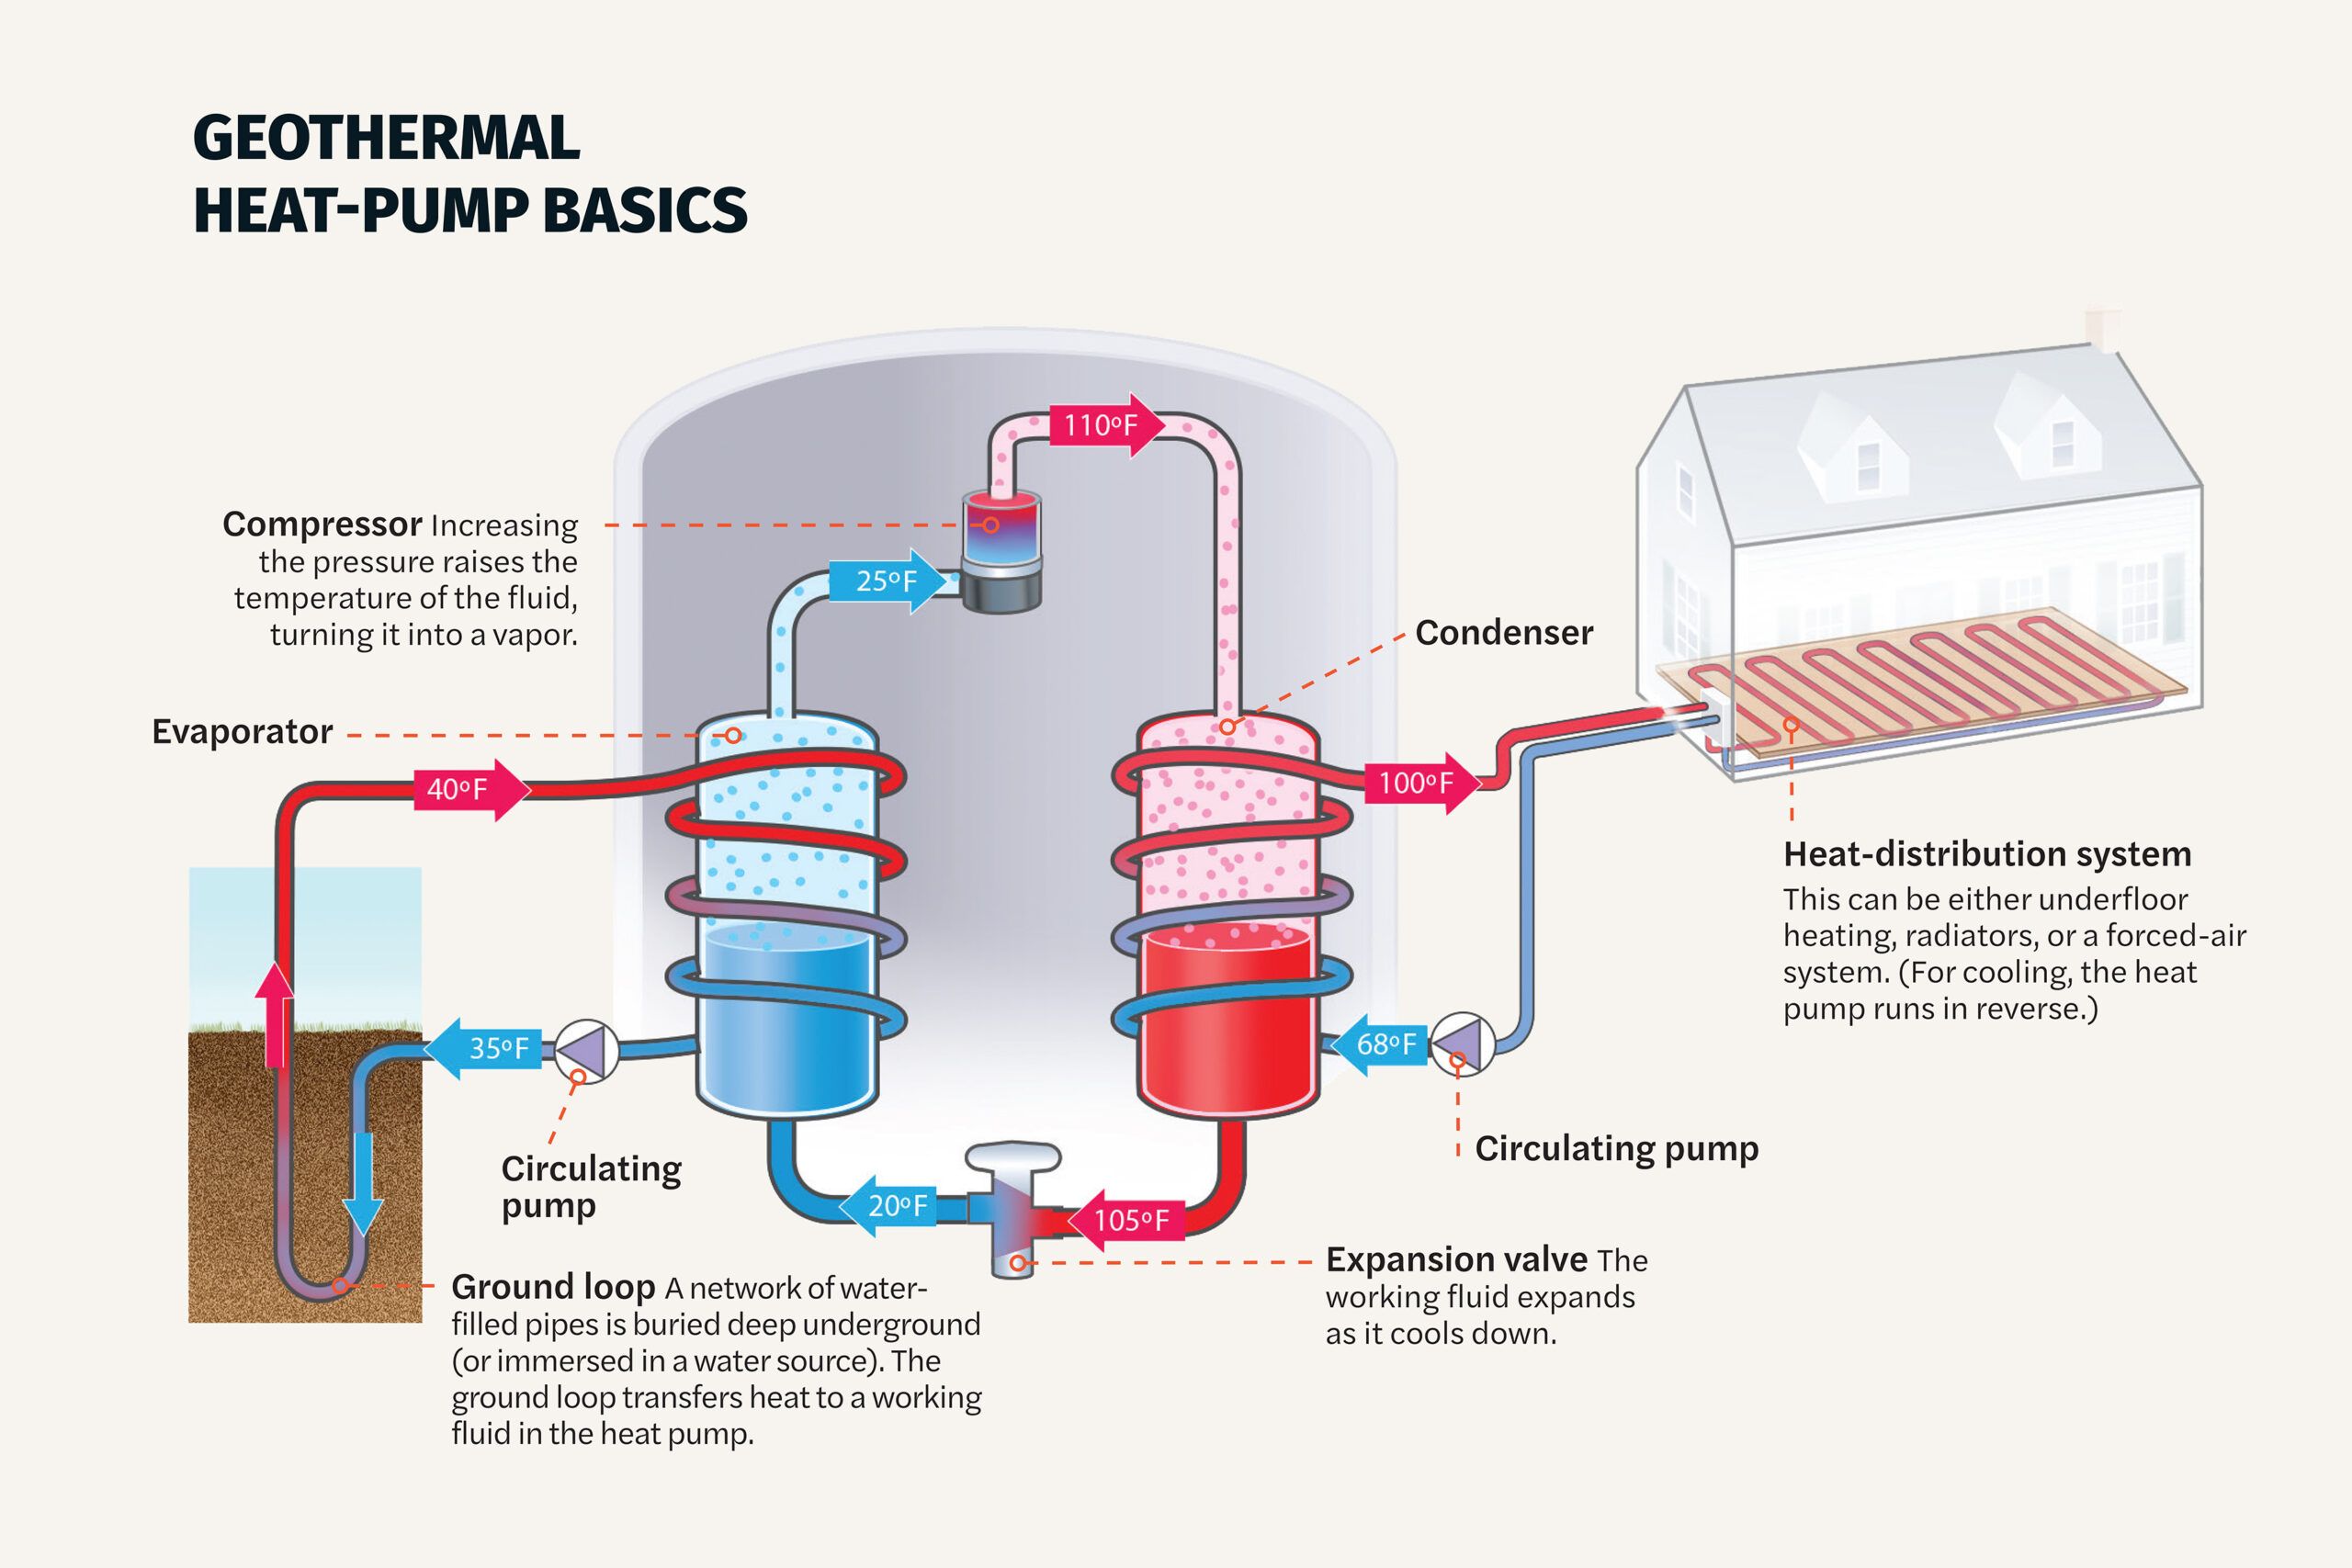 Illustration of how a geothermal heat pump works